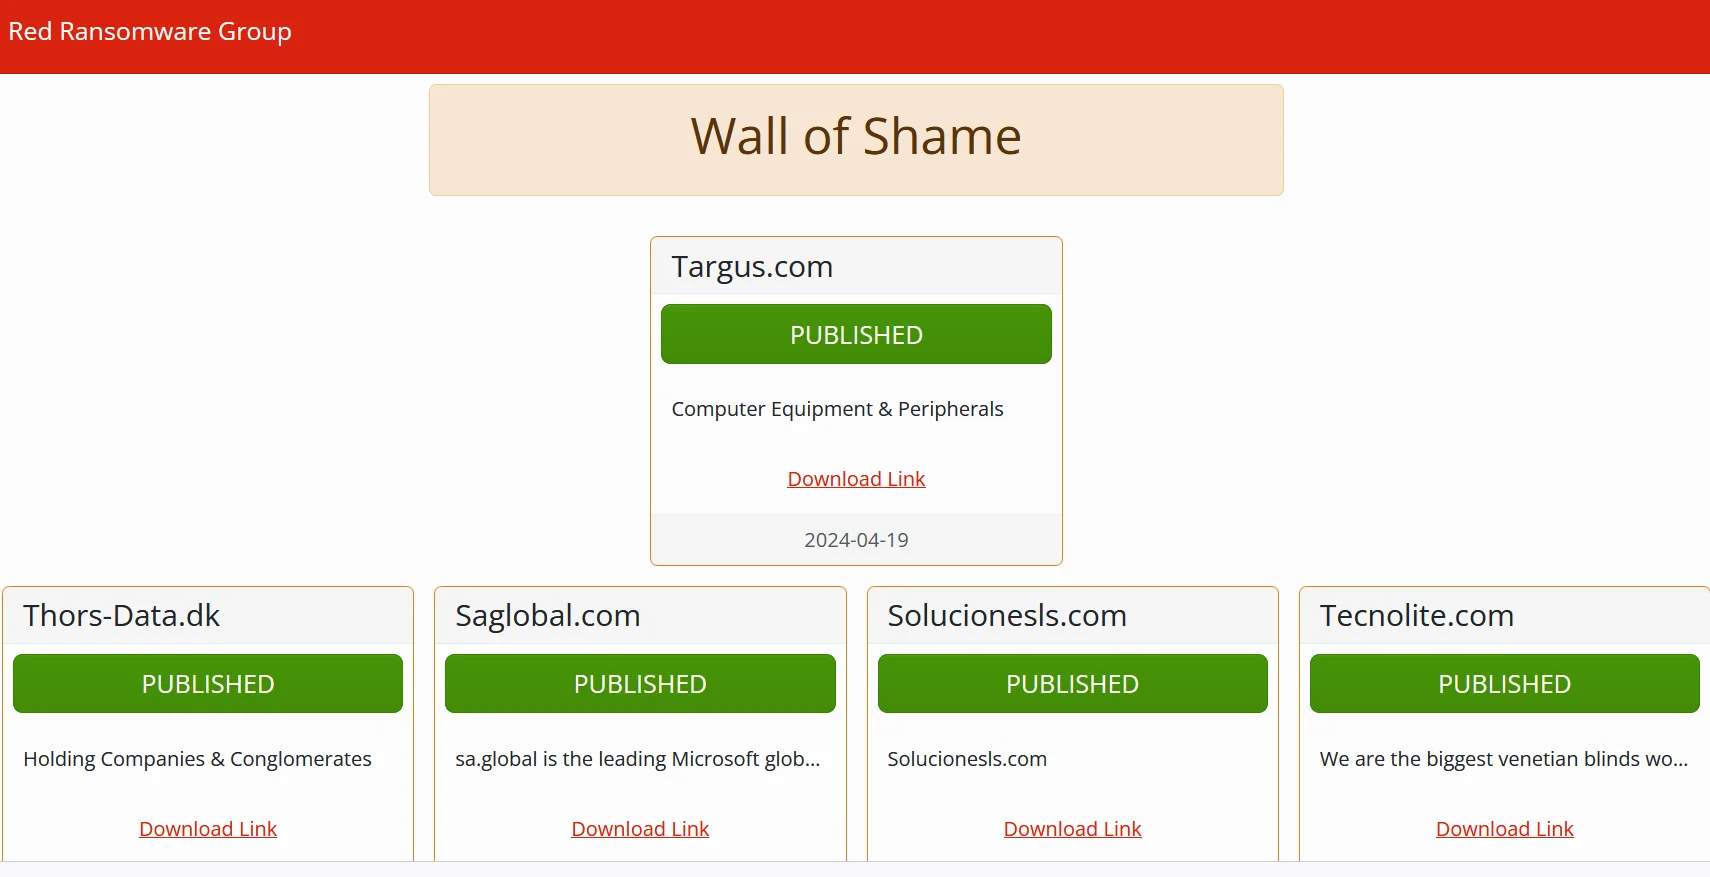 Red Ransomware Group’s Wall of Shame